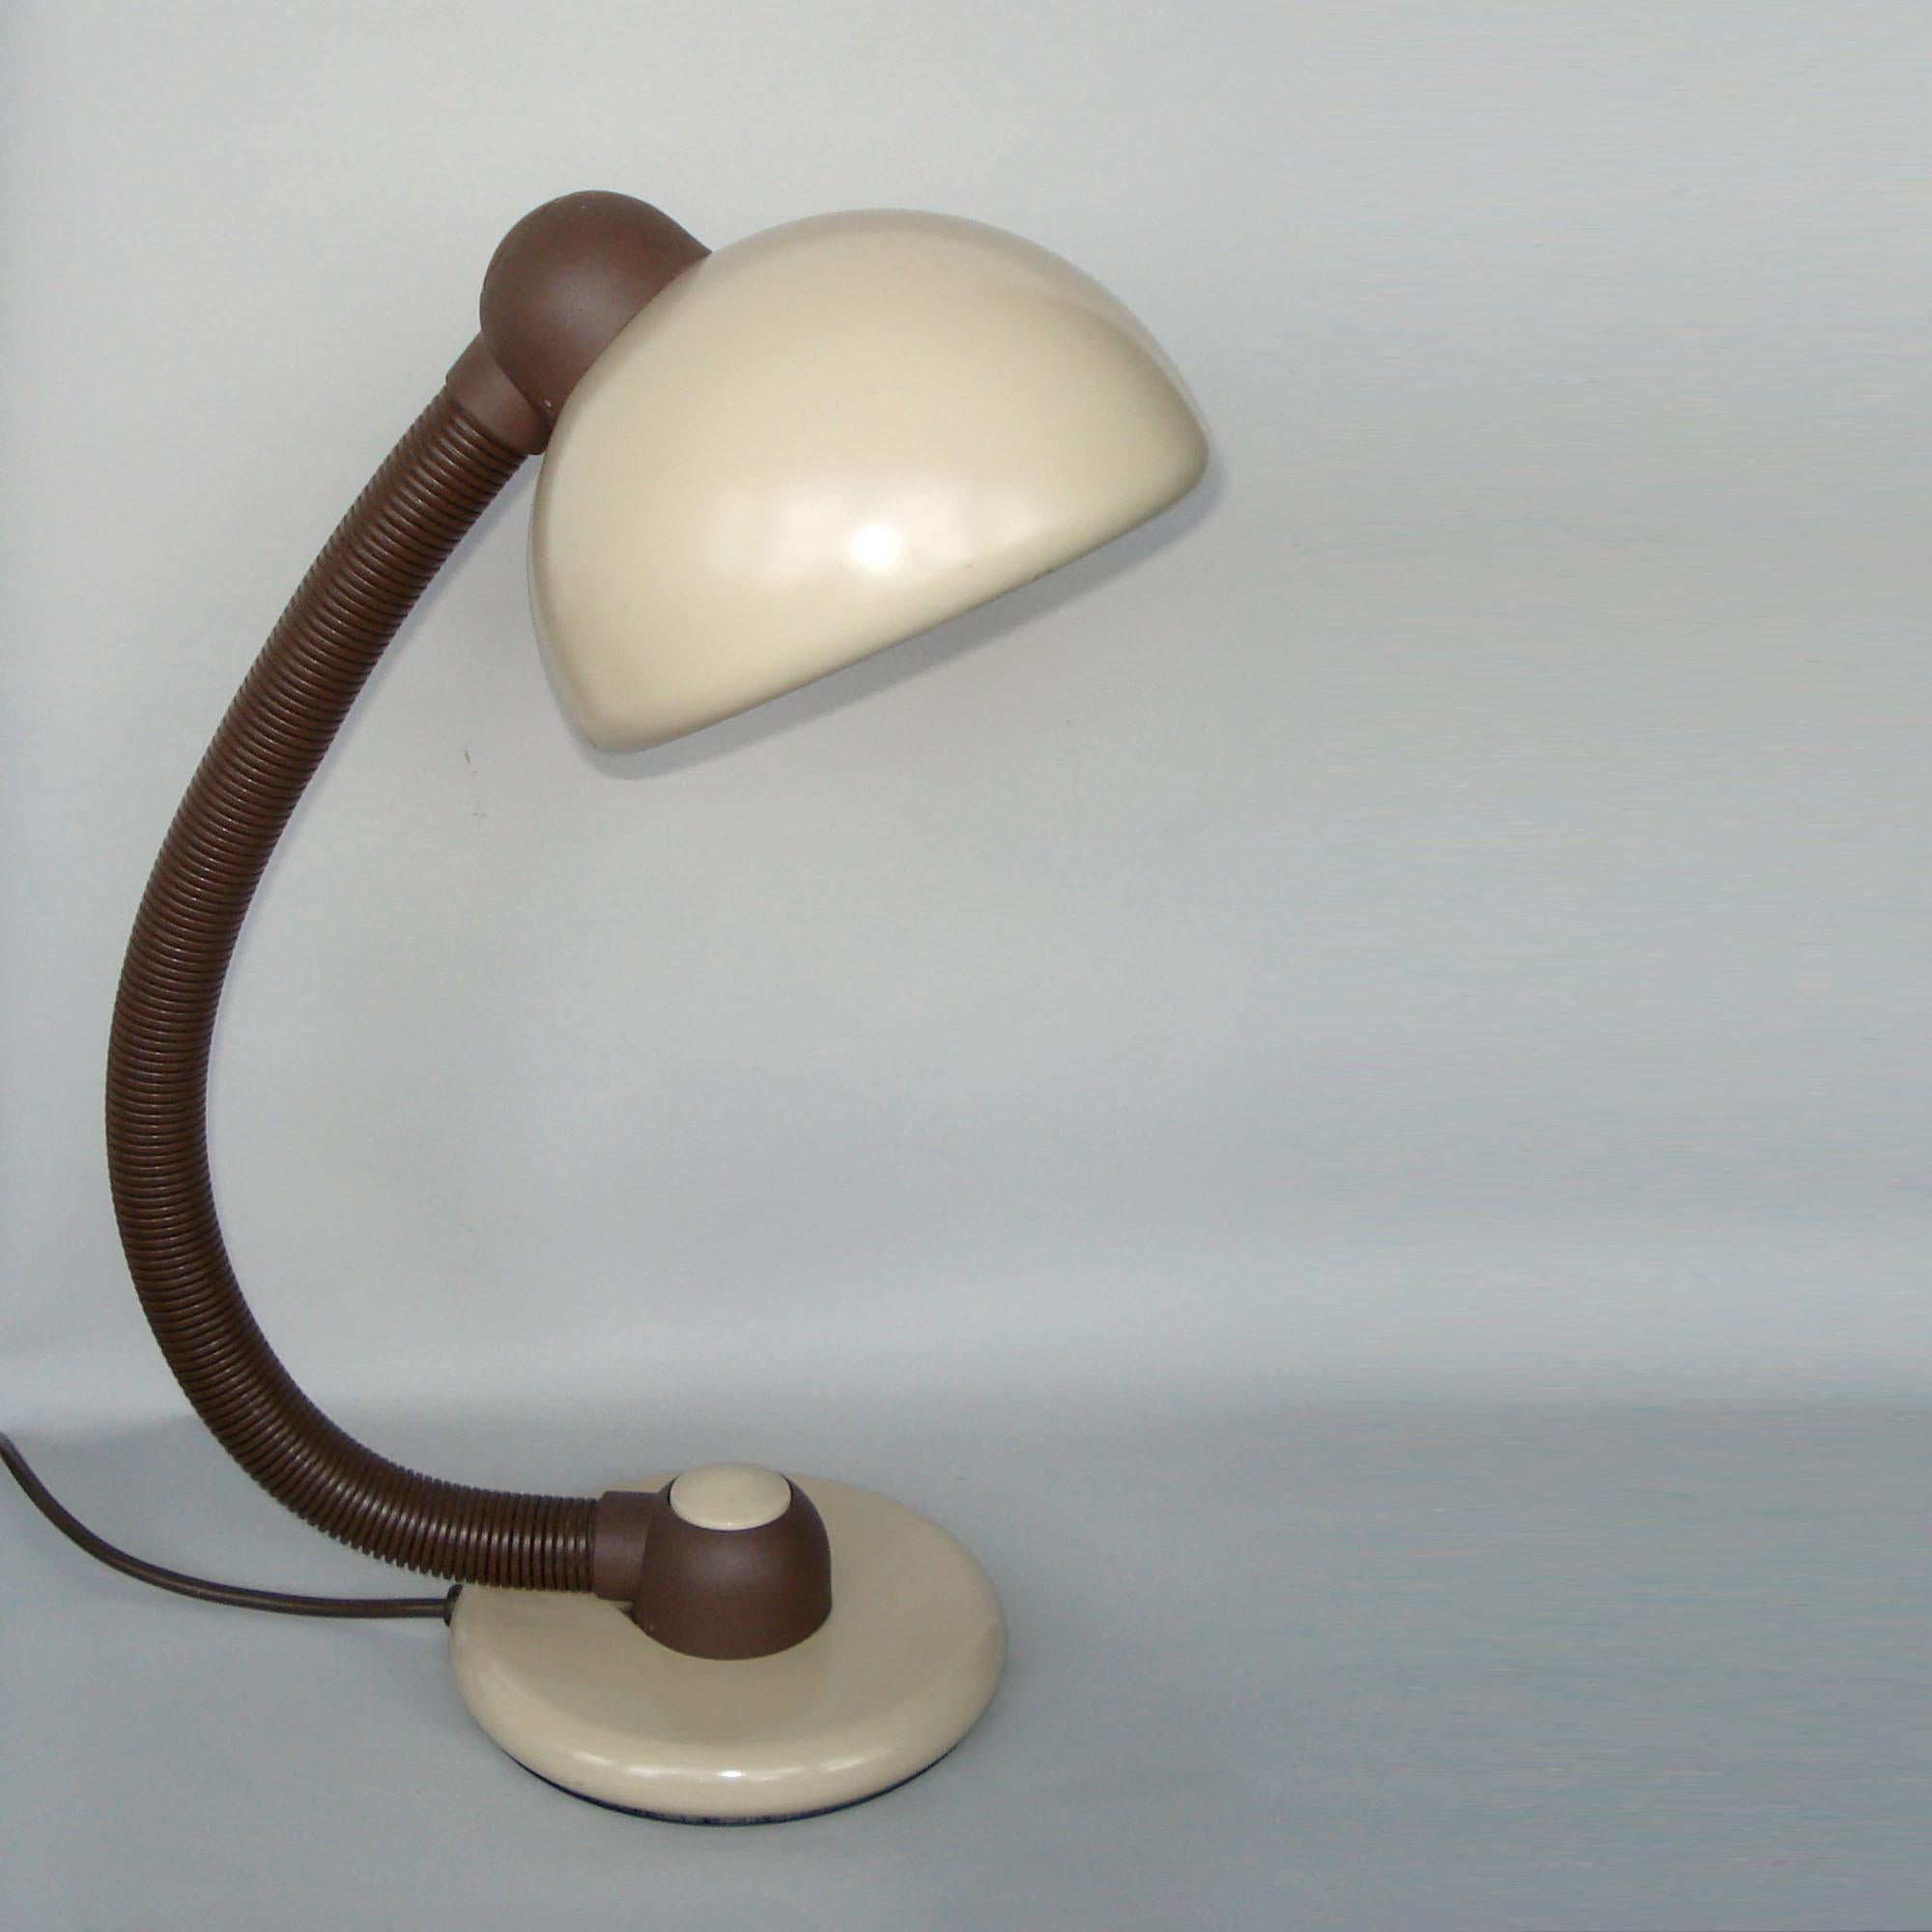 Vintage 1970s table lamp or desk lamp, made by Hustadt Leuchten in West Germany. Rounded design, this lamp features a flexible arm, covered in brown plastic, equipped with an E27 socket for a max 100W. Push on button in the center of the foot.
In a